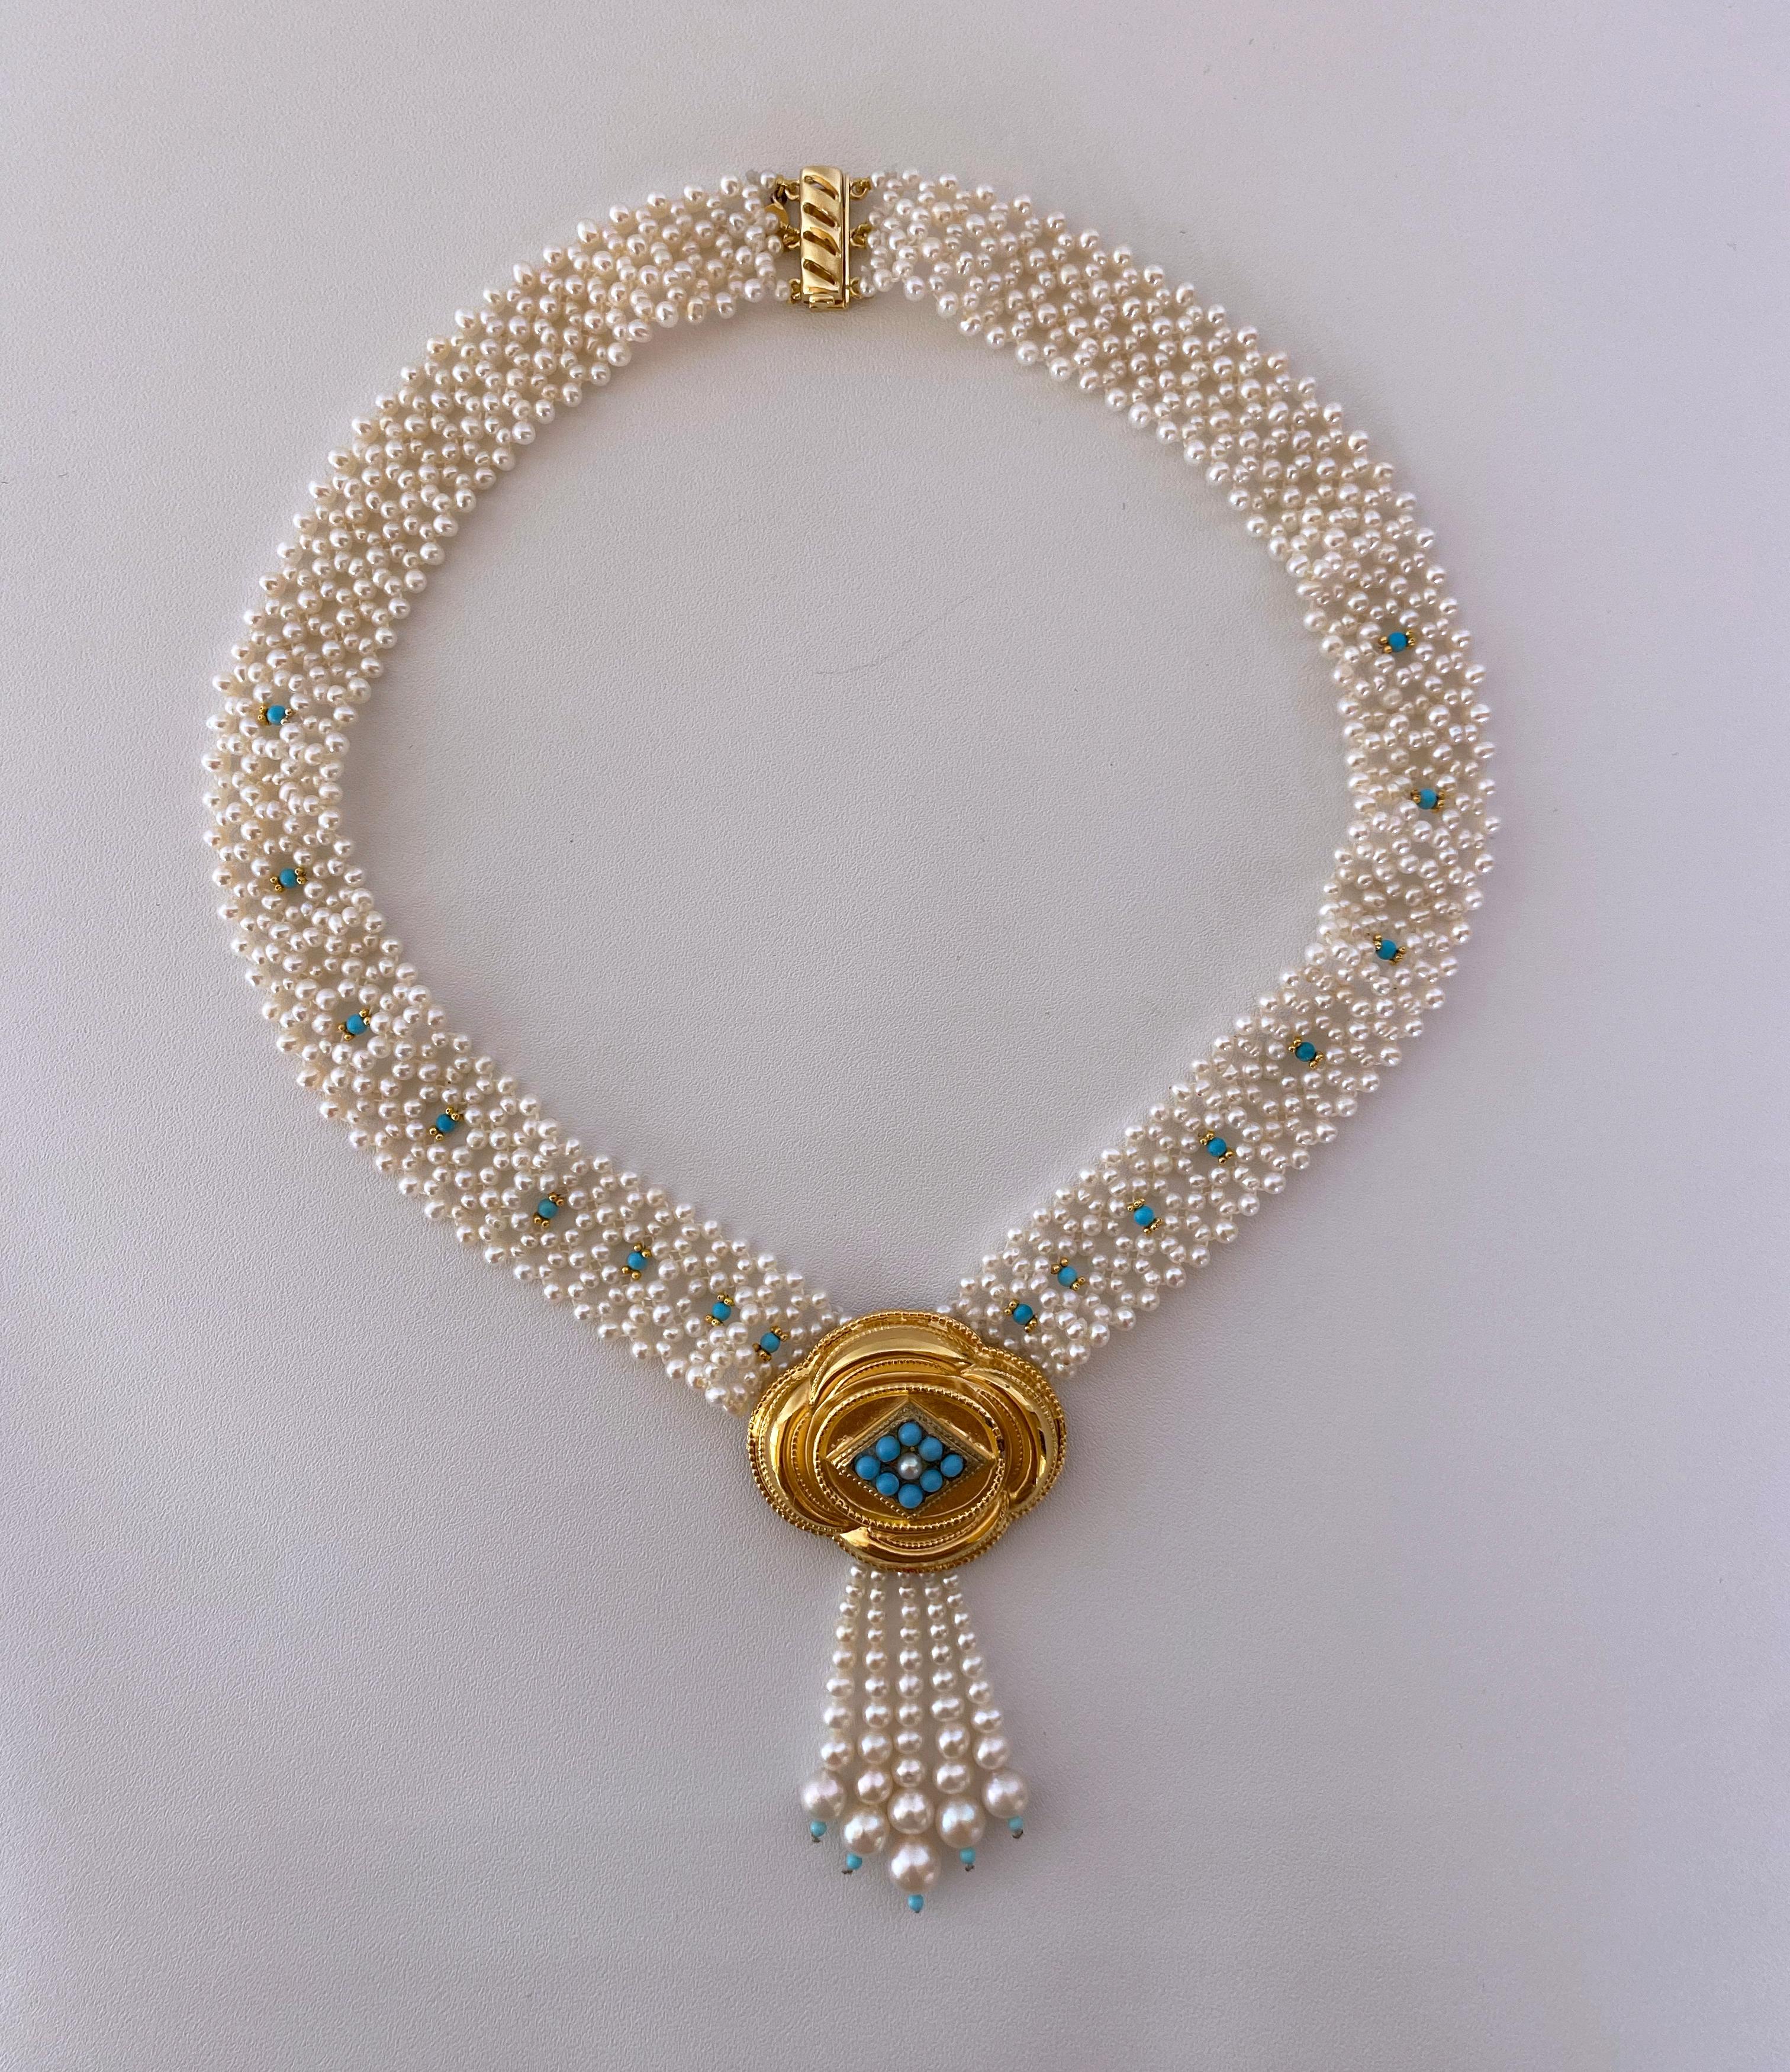 Marina J Woven Pearl and Turquoise Necklace with Vintage Centerpiece For Sale 4